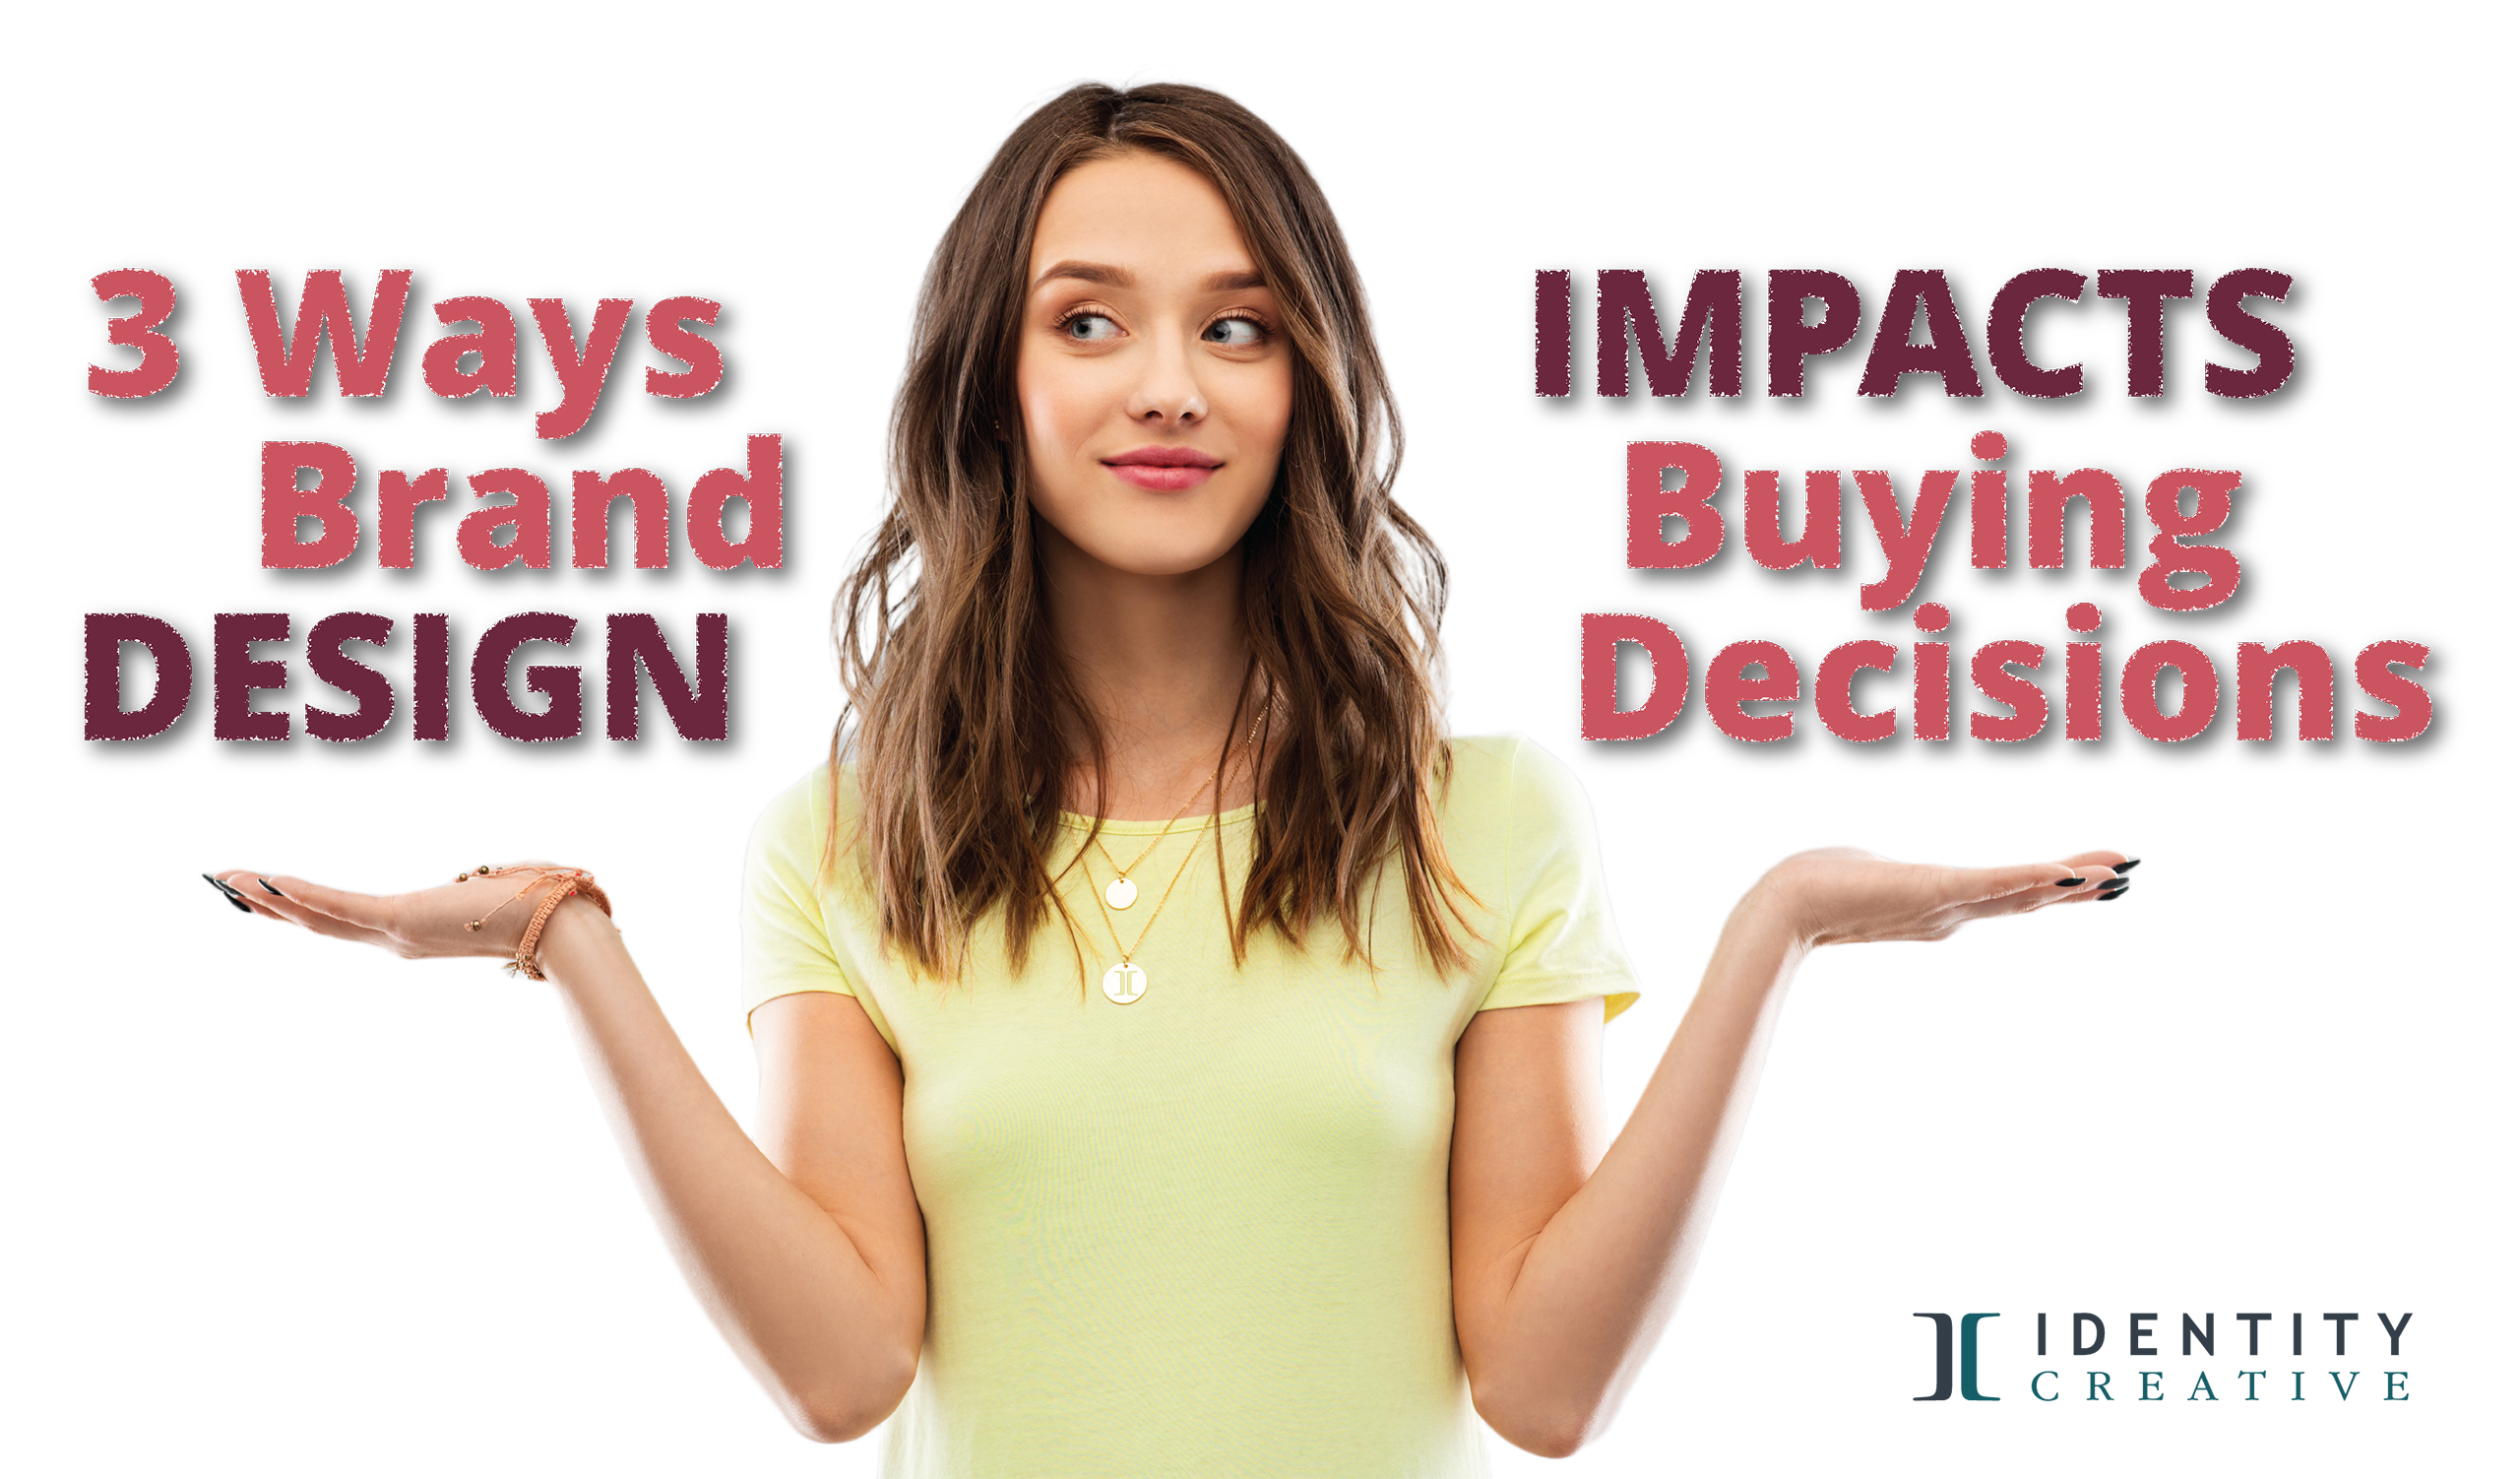 3 Ways Brand Design Impacts Purchasing Decisions